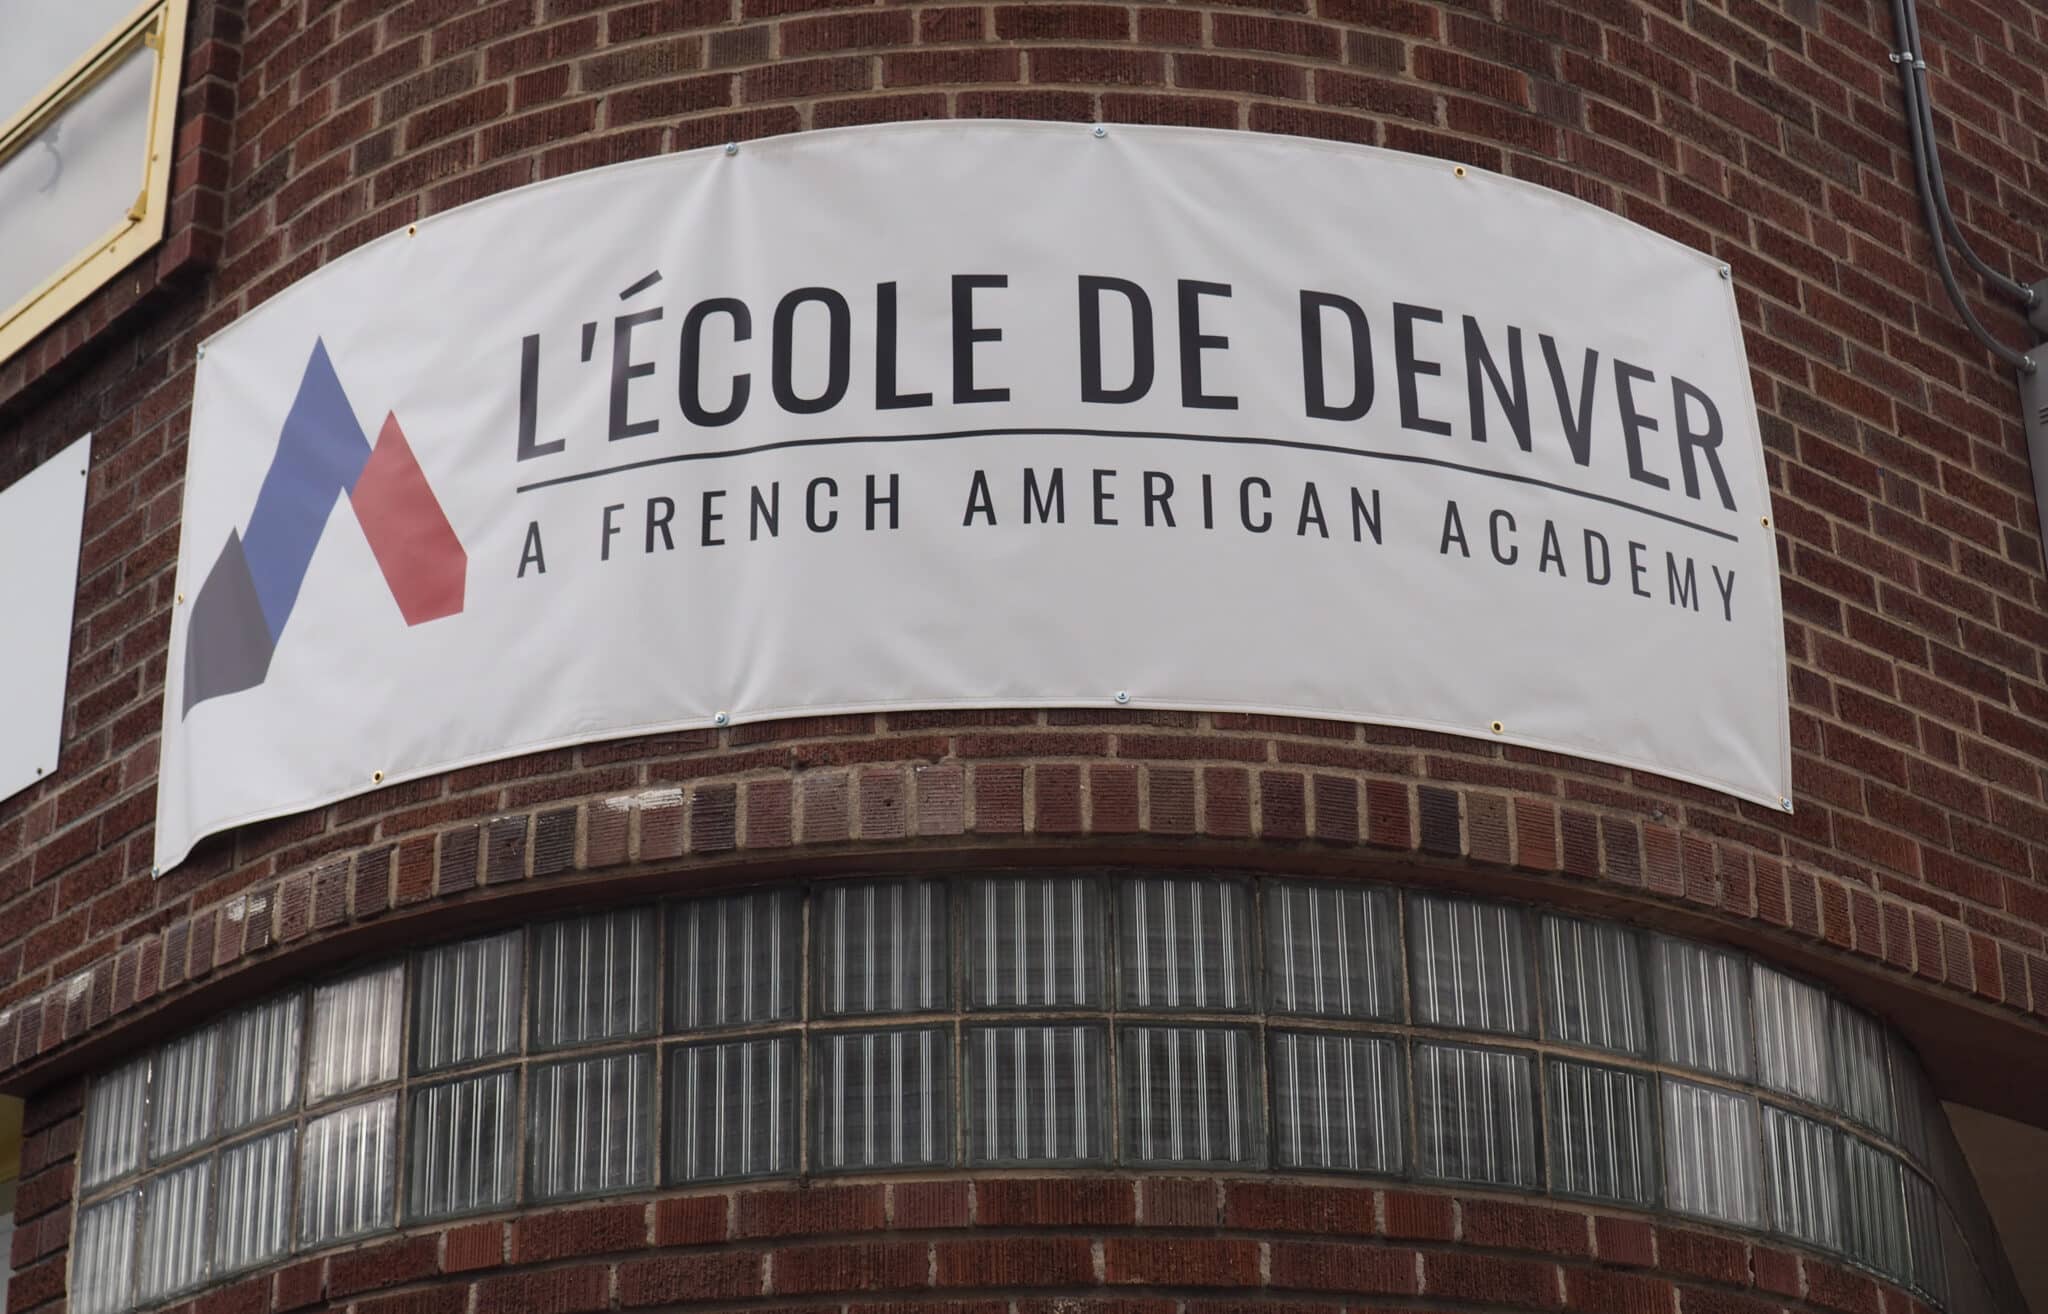 French American School of Denver moving to new location